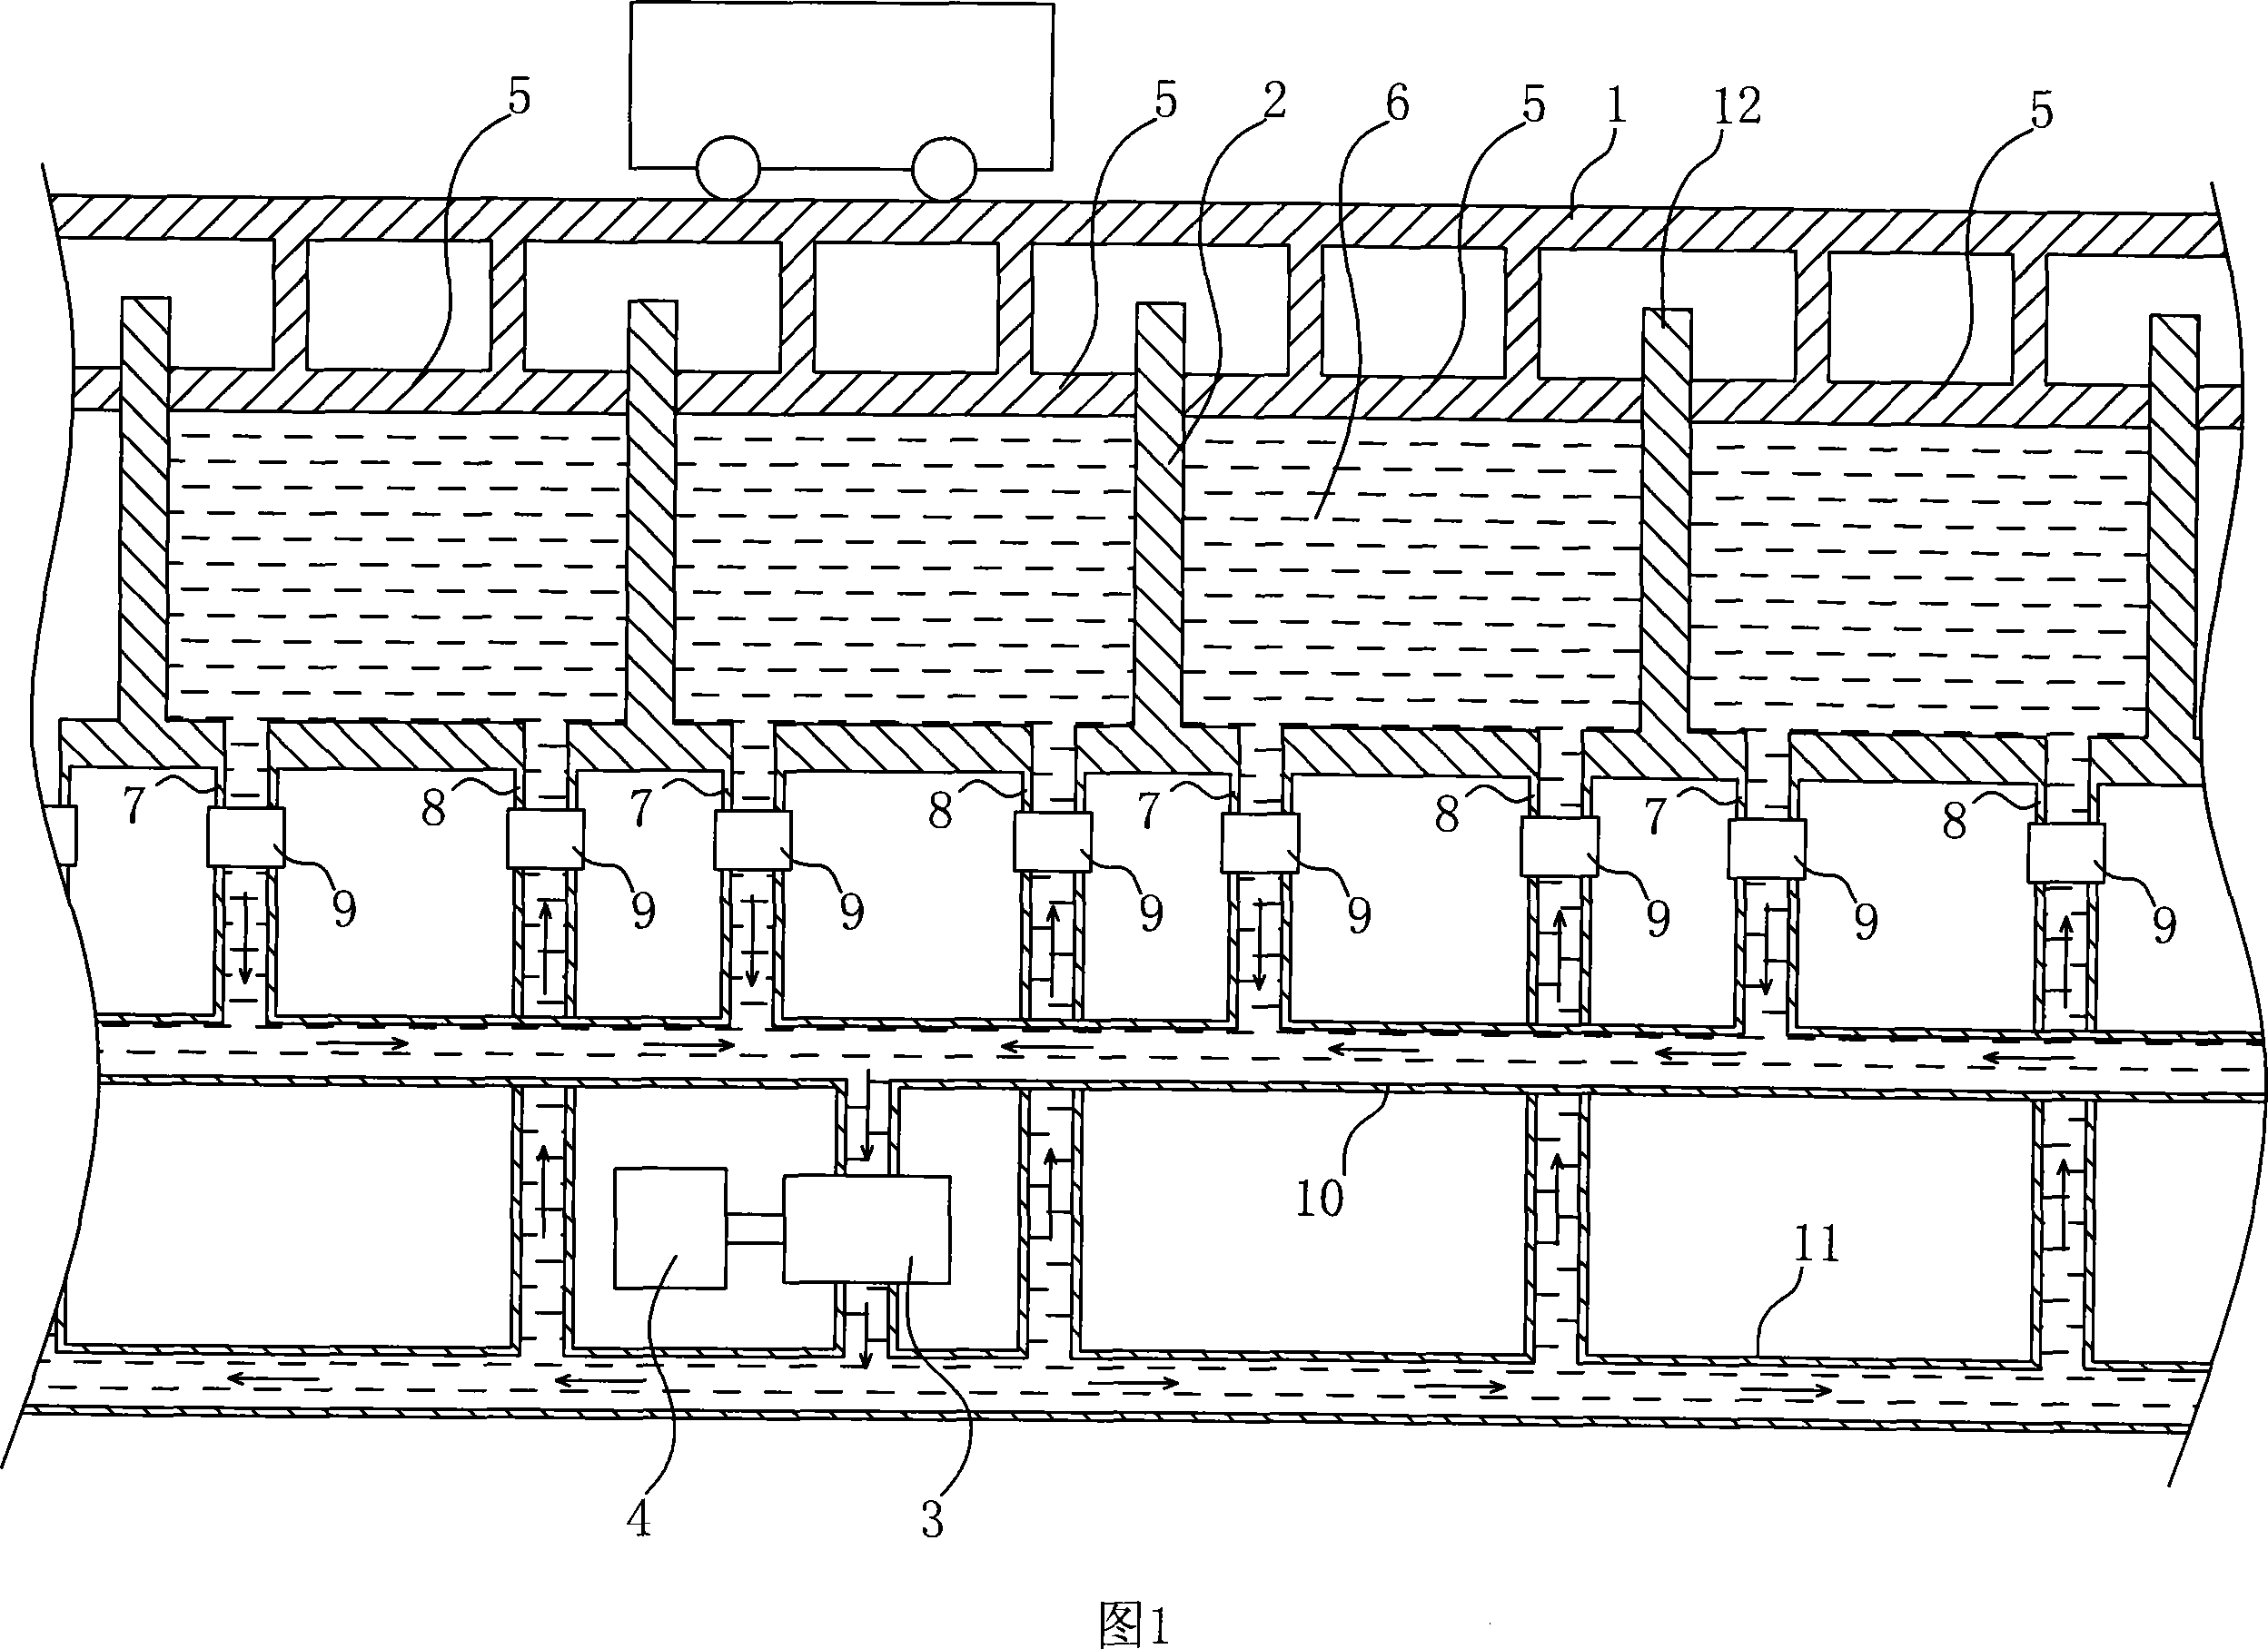 Moving body electric generating apparatus